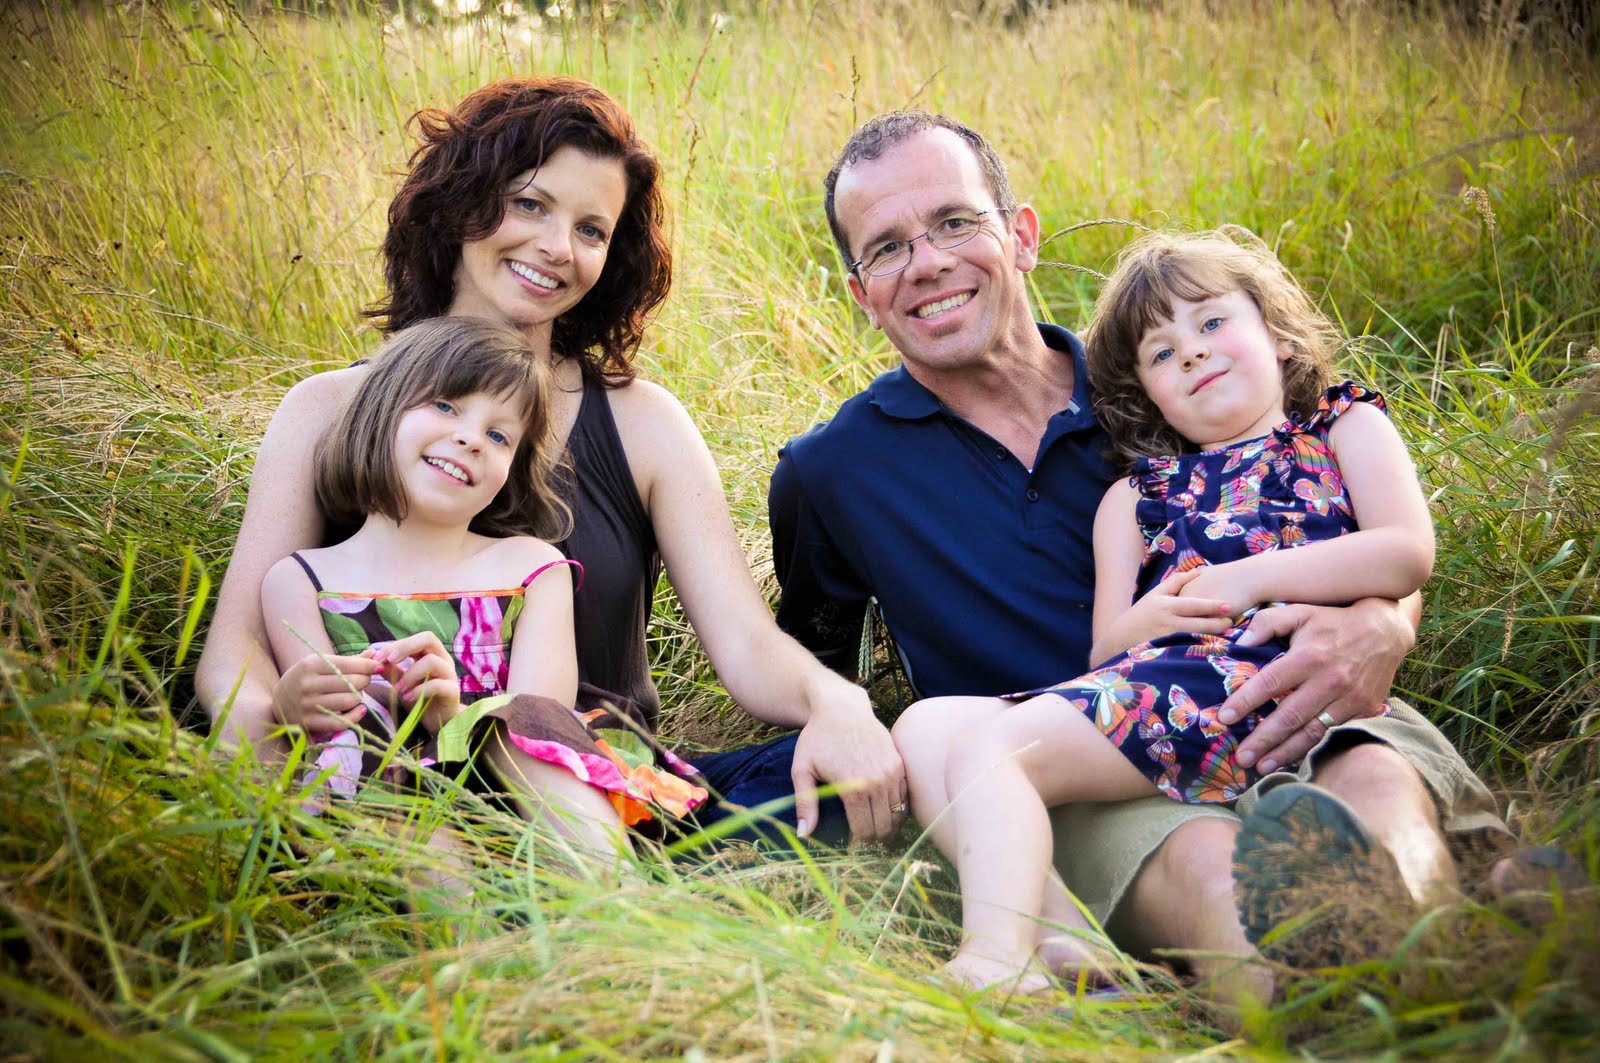 Redhanded Photography Blog: [family portraits: The Schurmann Family]